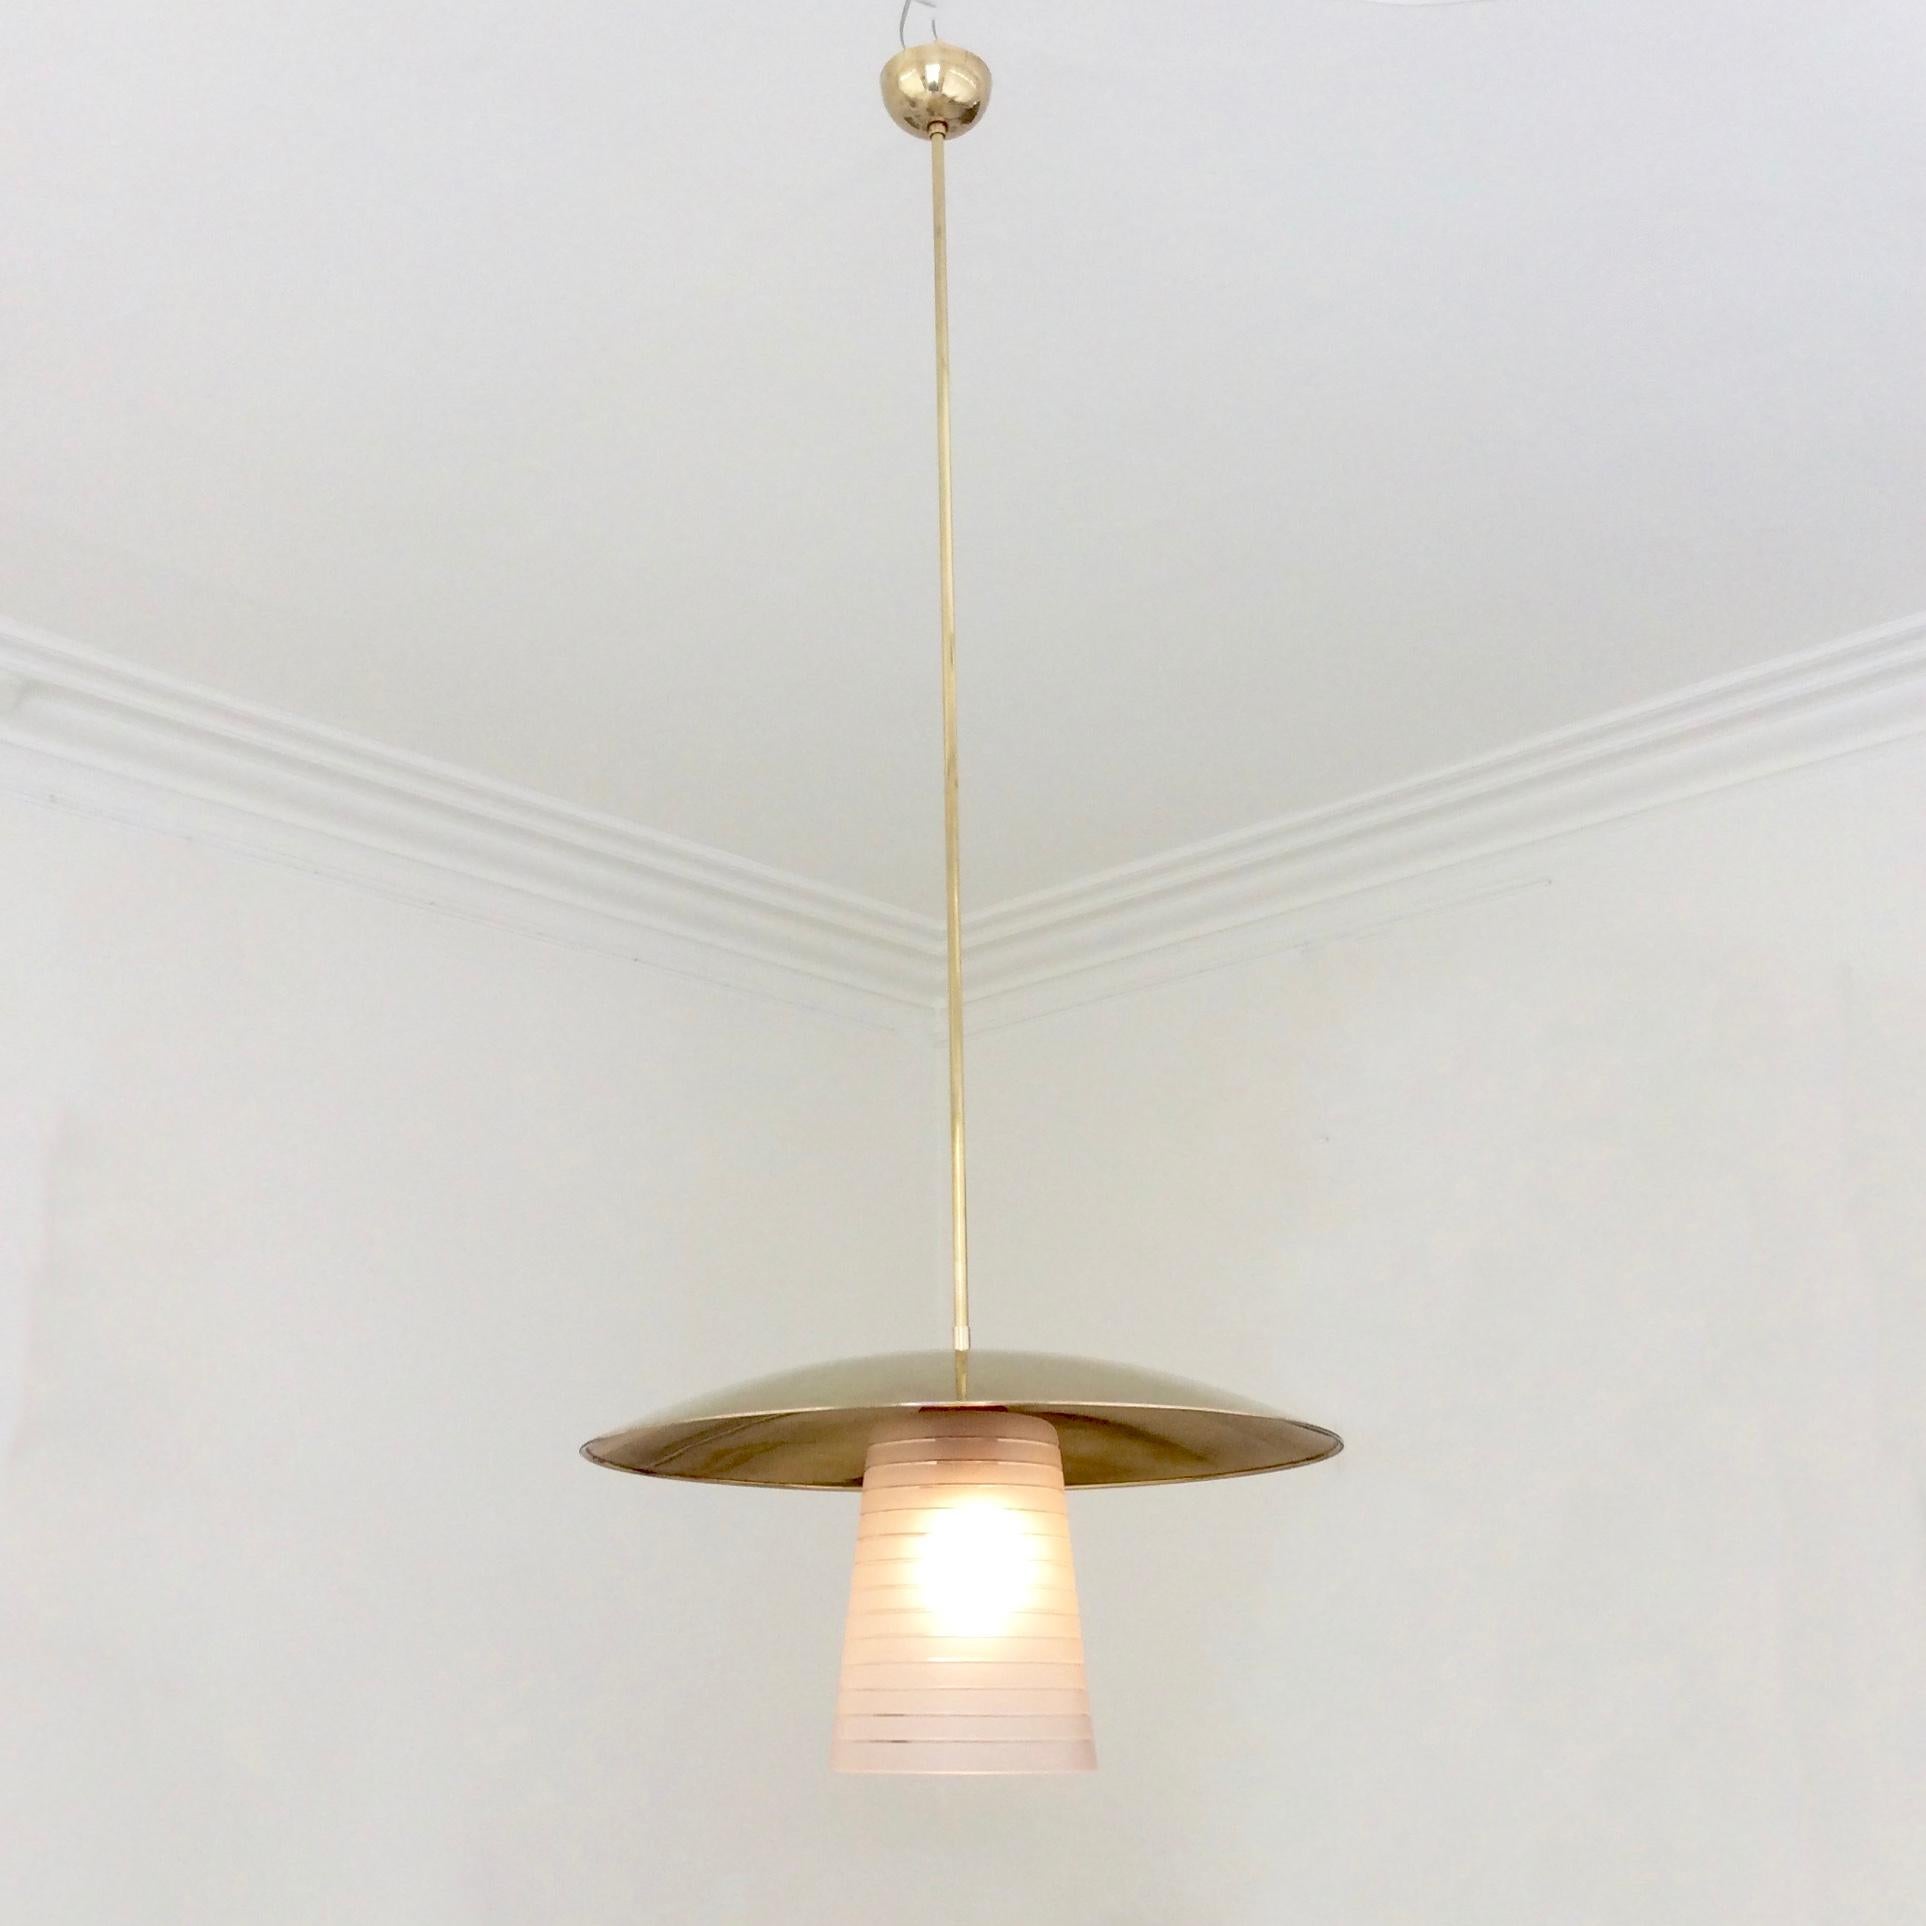 Mid-Century Modern Italian Hanging Lamp, Brass And Frosted Glass, circa 1950